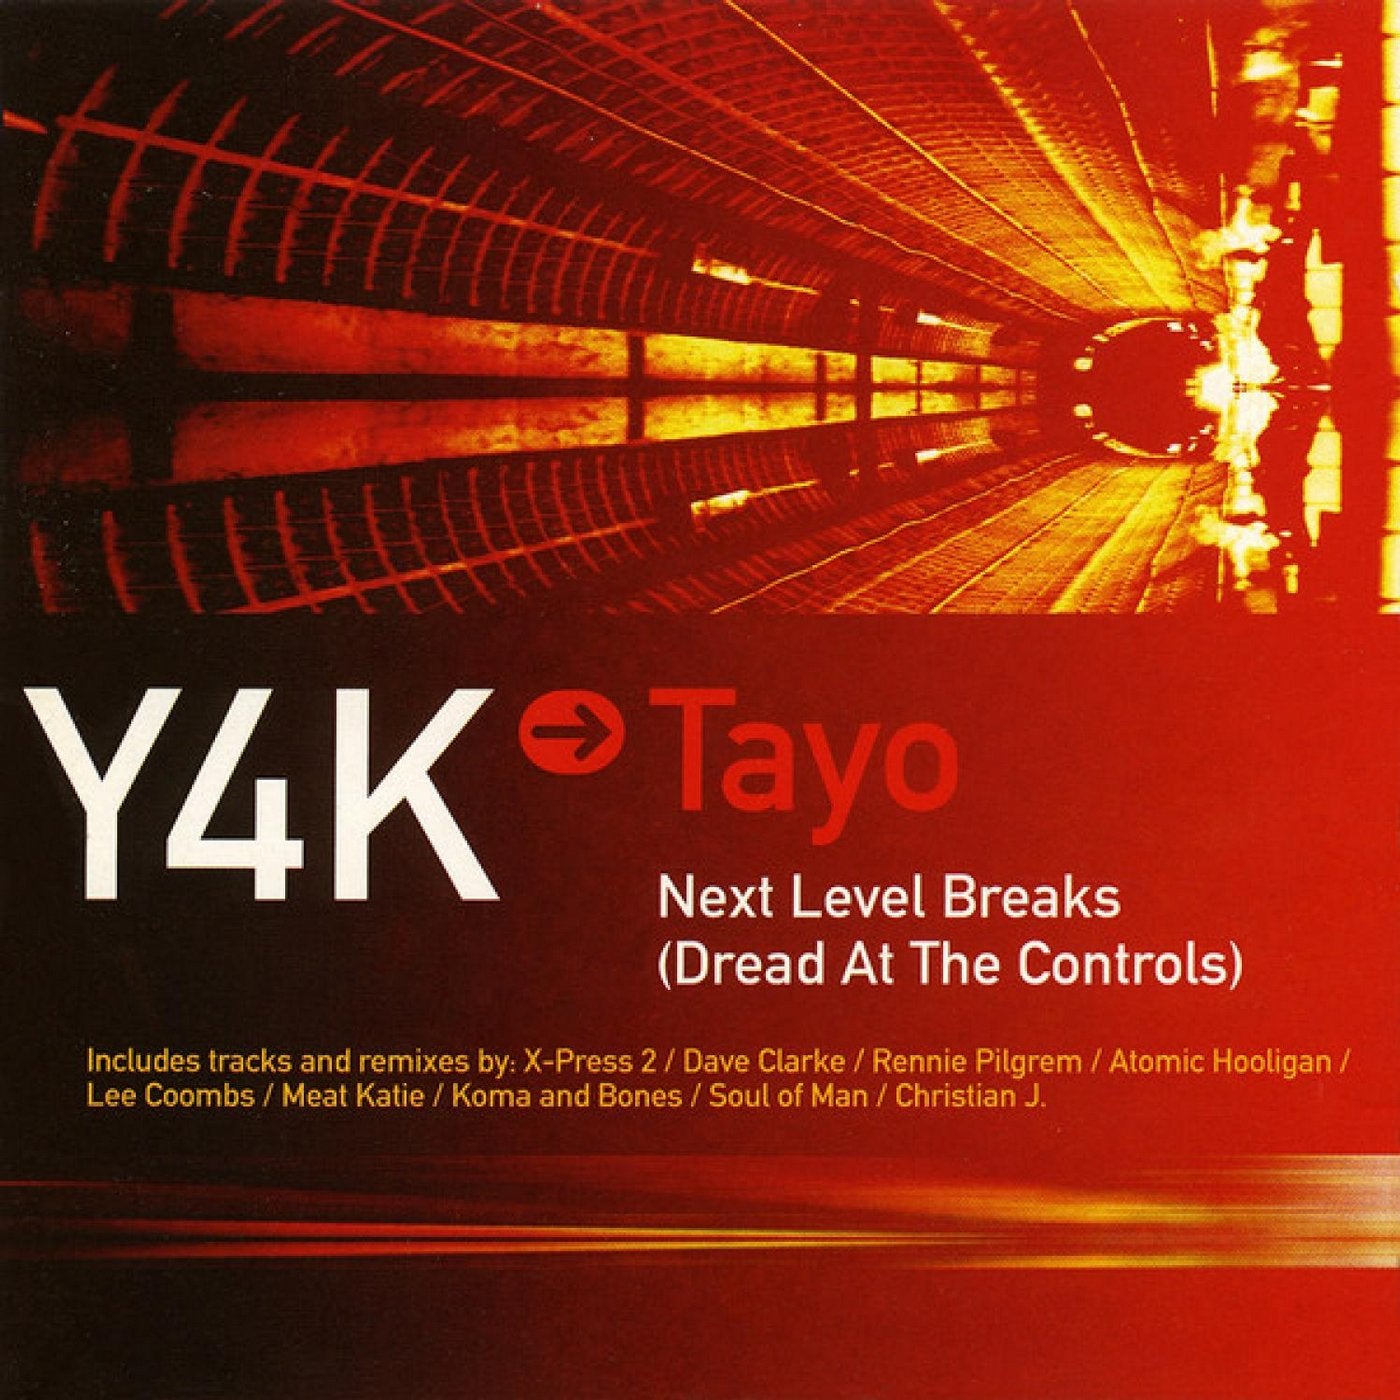 Tayo: Next Level Breaks (Dread At The Controls)